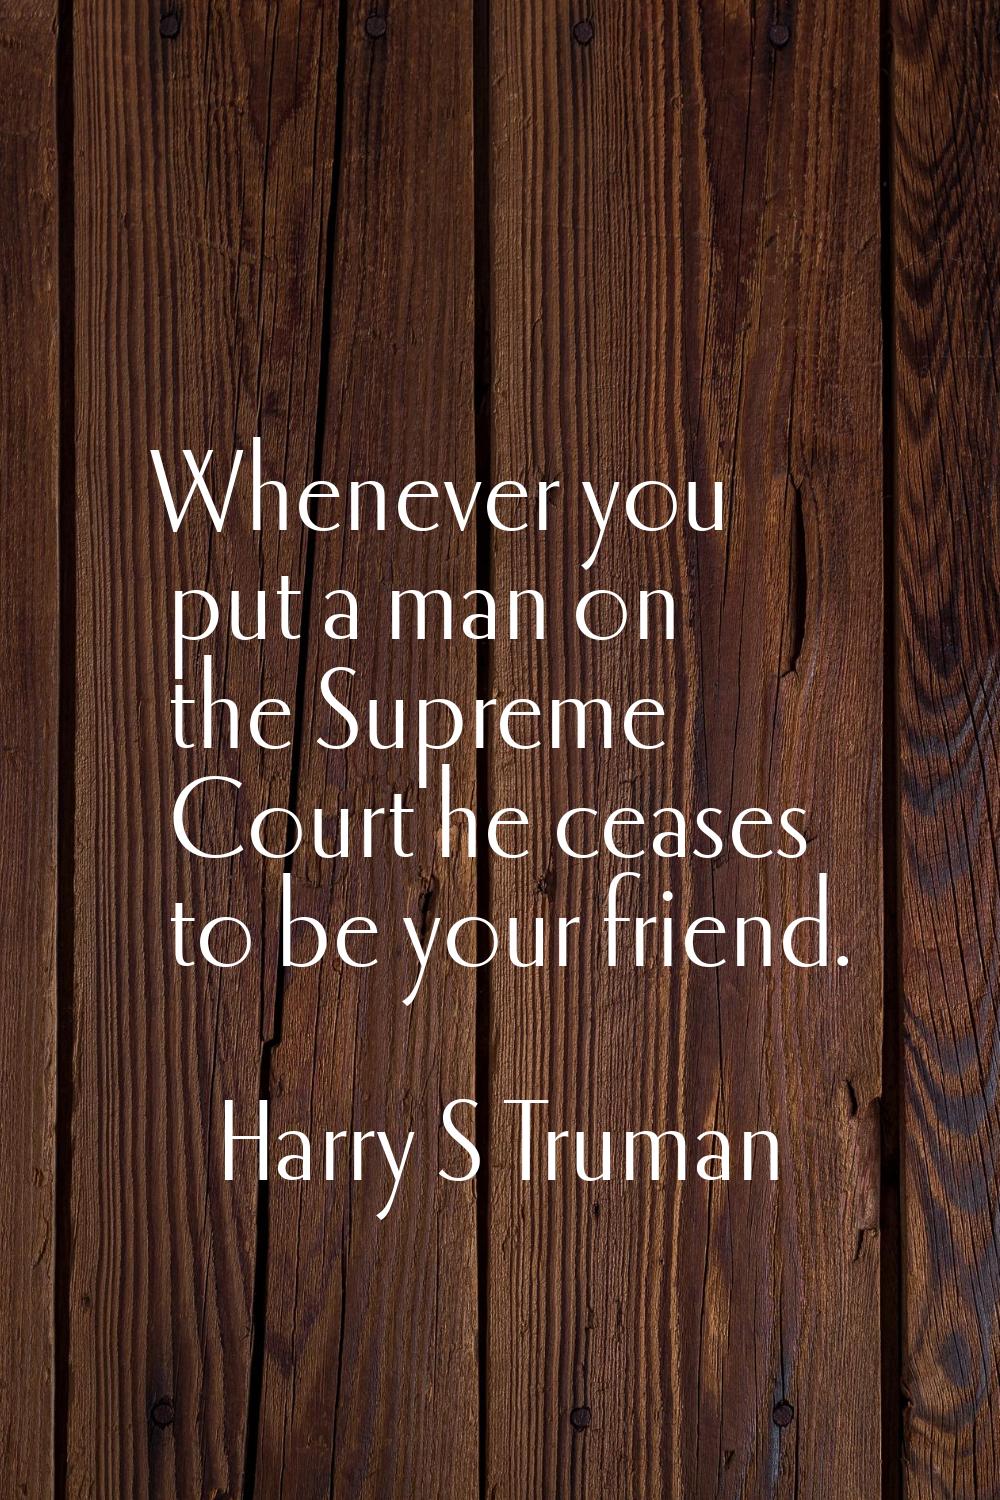 Whenever you put a man on the Supreme Court he ceases to be your friend.